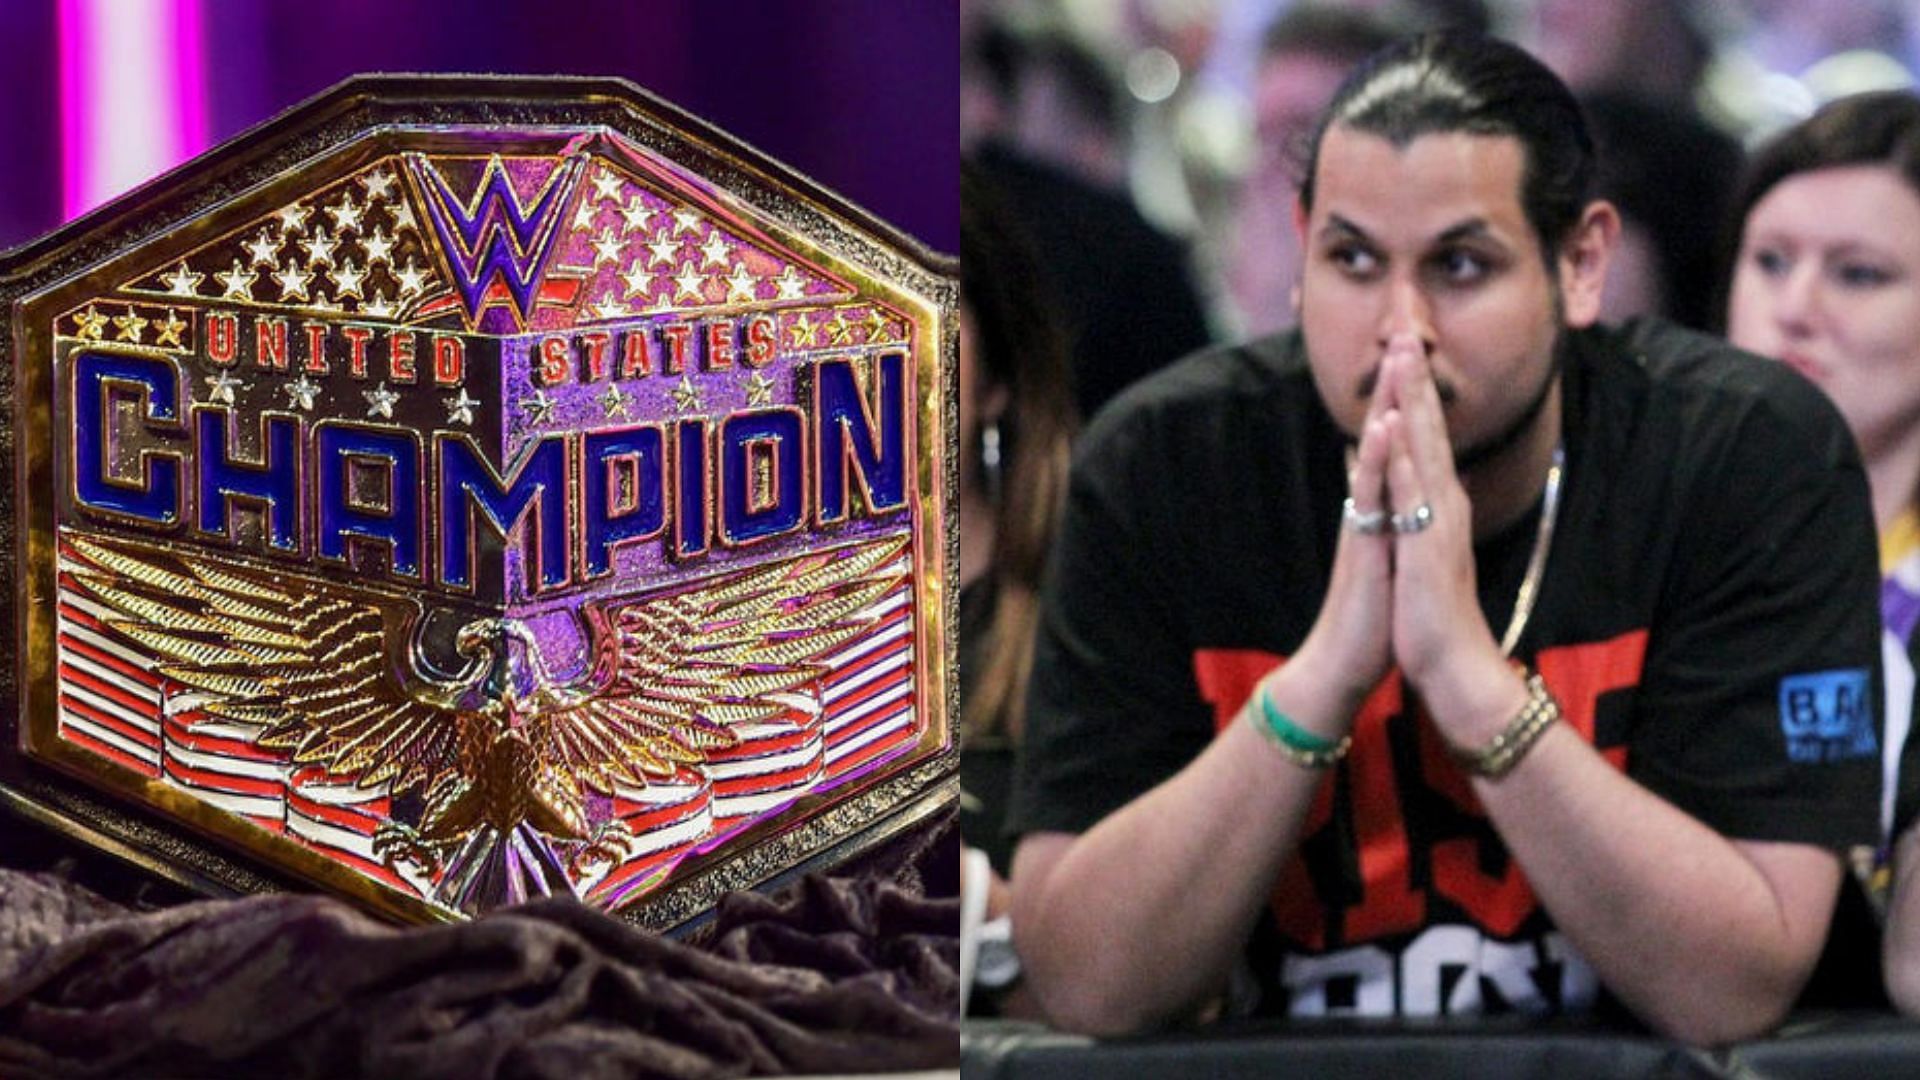 Former United States Champion joins a popular promotion!